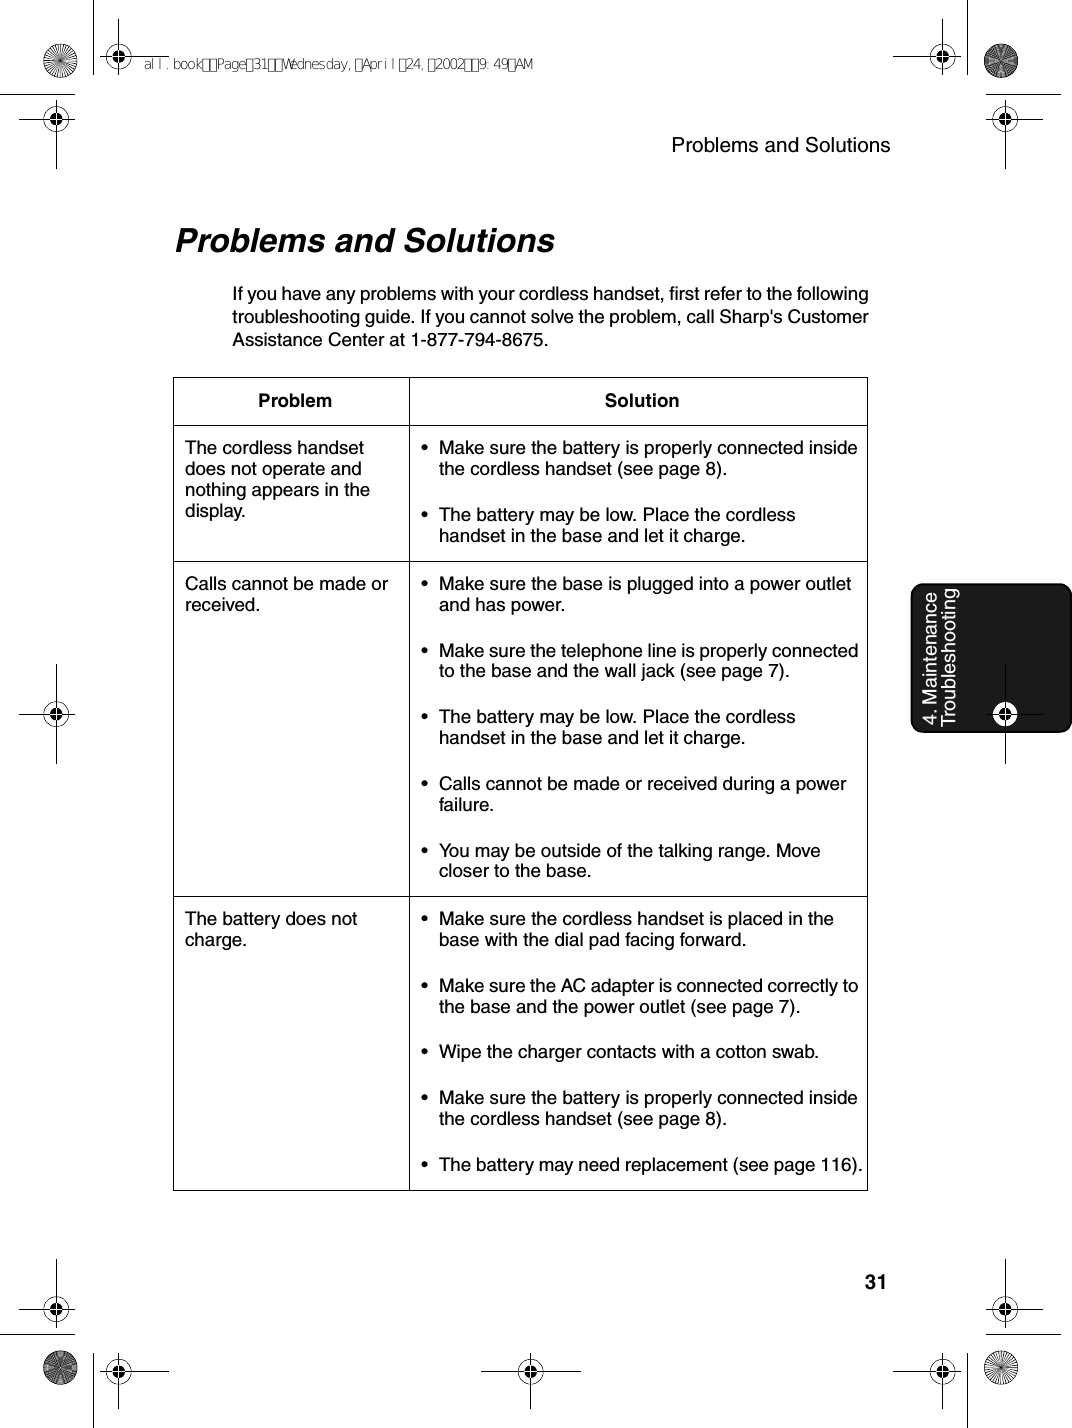 Problems and Solutions314. Maintenance  TroubleshootingProblems and SolutionsIf you have any problems with your cordless handset, first refer to the following troubleshooting guide. If you cannot solve the problem, call Sharp&apos;s Customer Assistance Center at 1-877-794-8675.Problem SolutionThe cordless handset does not operate and nothing appears in the display.•Make sure the battery is properly connected inside the cordless handset (see page 8).•The battery may be low. Place the cordless handset in the base and let it charge.Calls cannot be made or received.•Make sure the base is plugged into a power outlet and has power.•Make sure the telephone line is properly connected to the base and the wall jack (see page 7).•The battery may be low. Place the cordless handset in the base and let it charge.•Calls cannot be made or received during a power failure.•You may be outside of the talking range. Move closer to the base.The battery does not charge.•Make sure the cordless handset is placed in the base with the dial pad facing forward.•Make sure the AC adapter is connected correctly to the base and the power outlet (see page 7).•Wipe the charger contacts with a cotton swab.•Make sure the battery is properly connected inside the cordless handset (see page 8).•The battery may need replacement (see page 116).all.bookPage31Wednesday,April24,20029:49AM